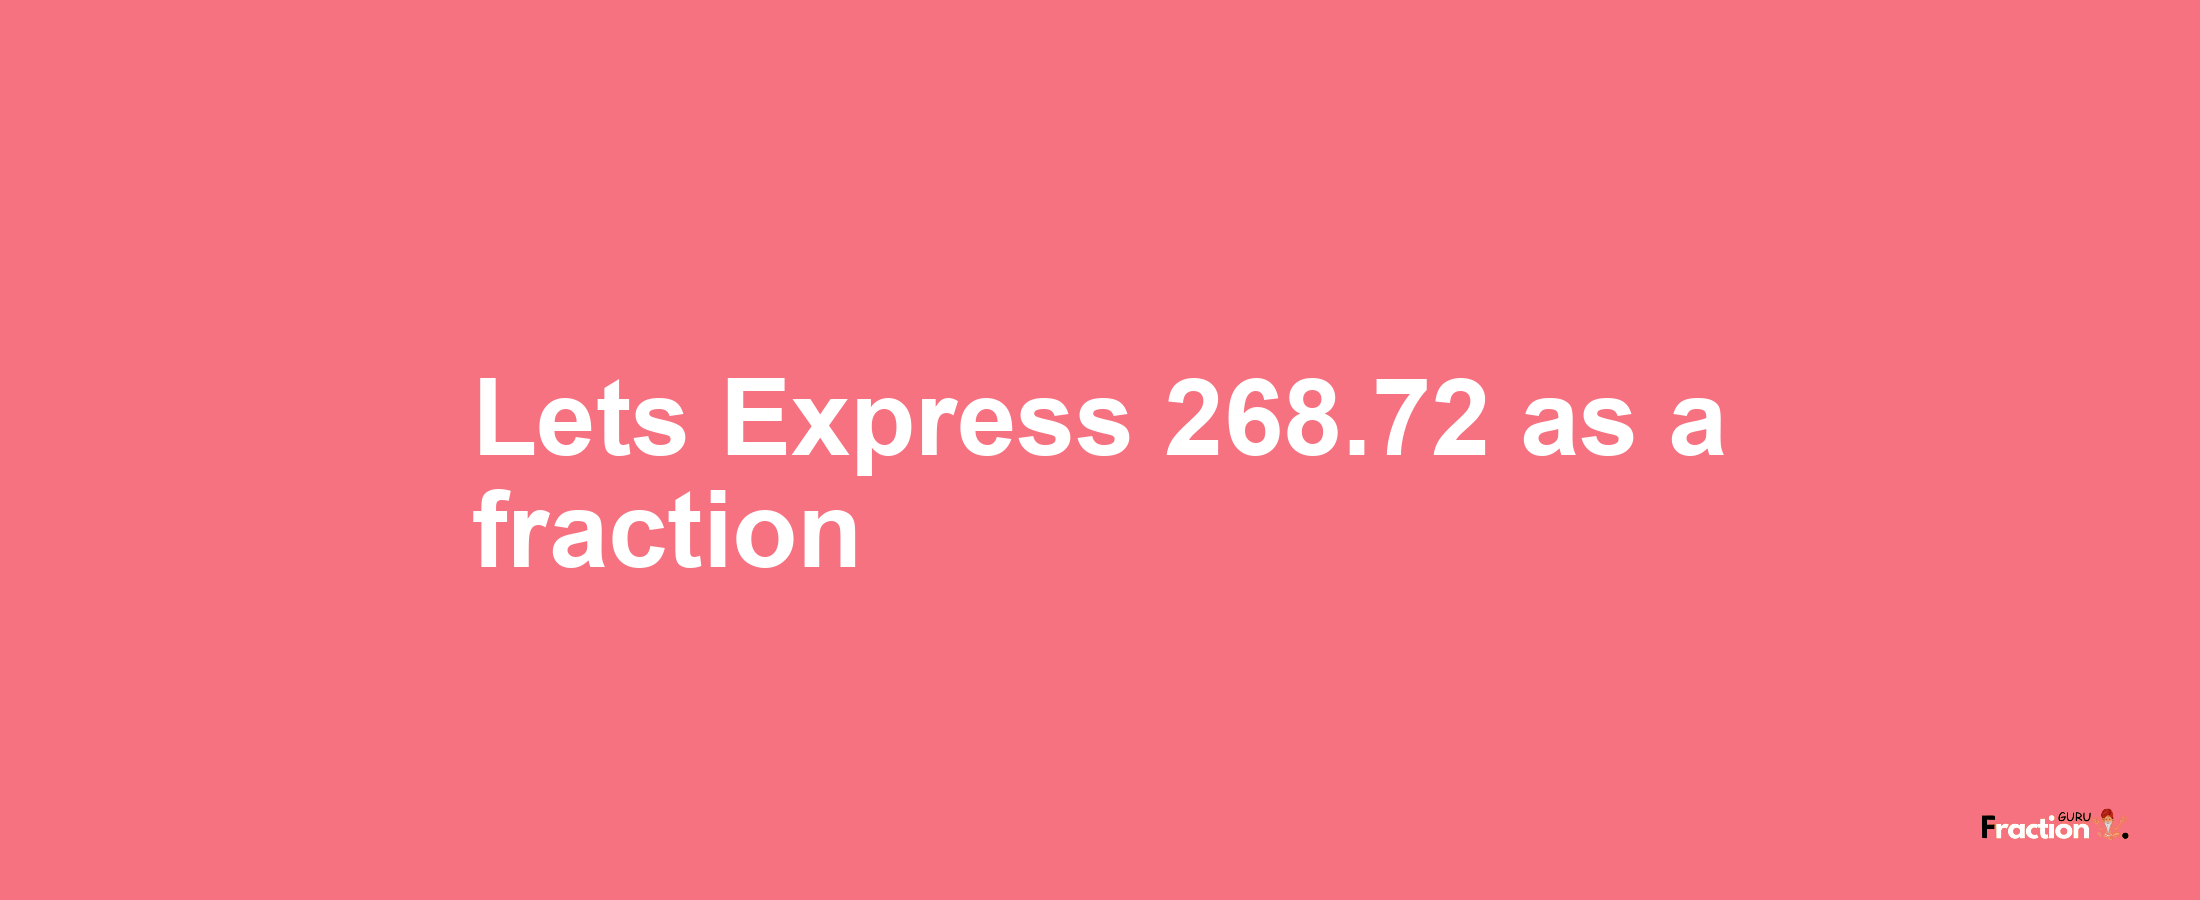 Lets Express 268.72 as afraction